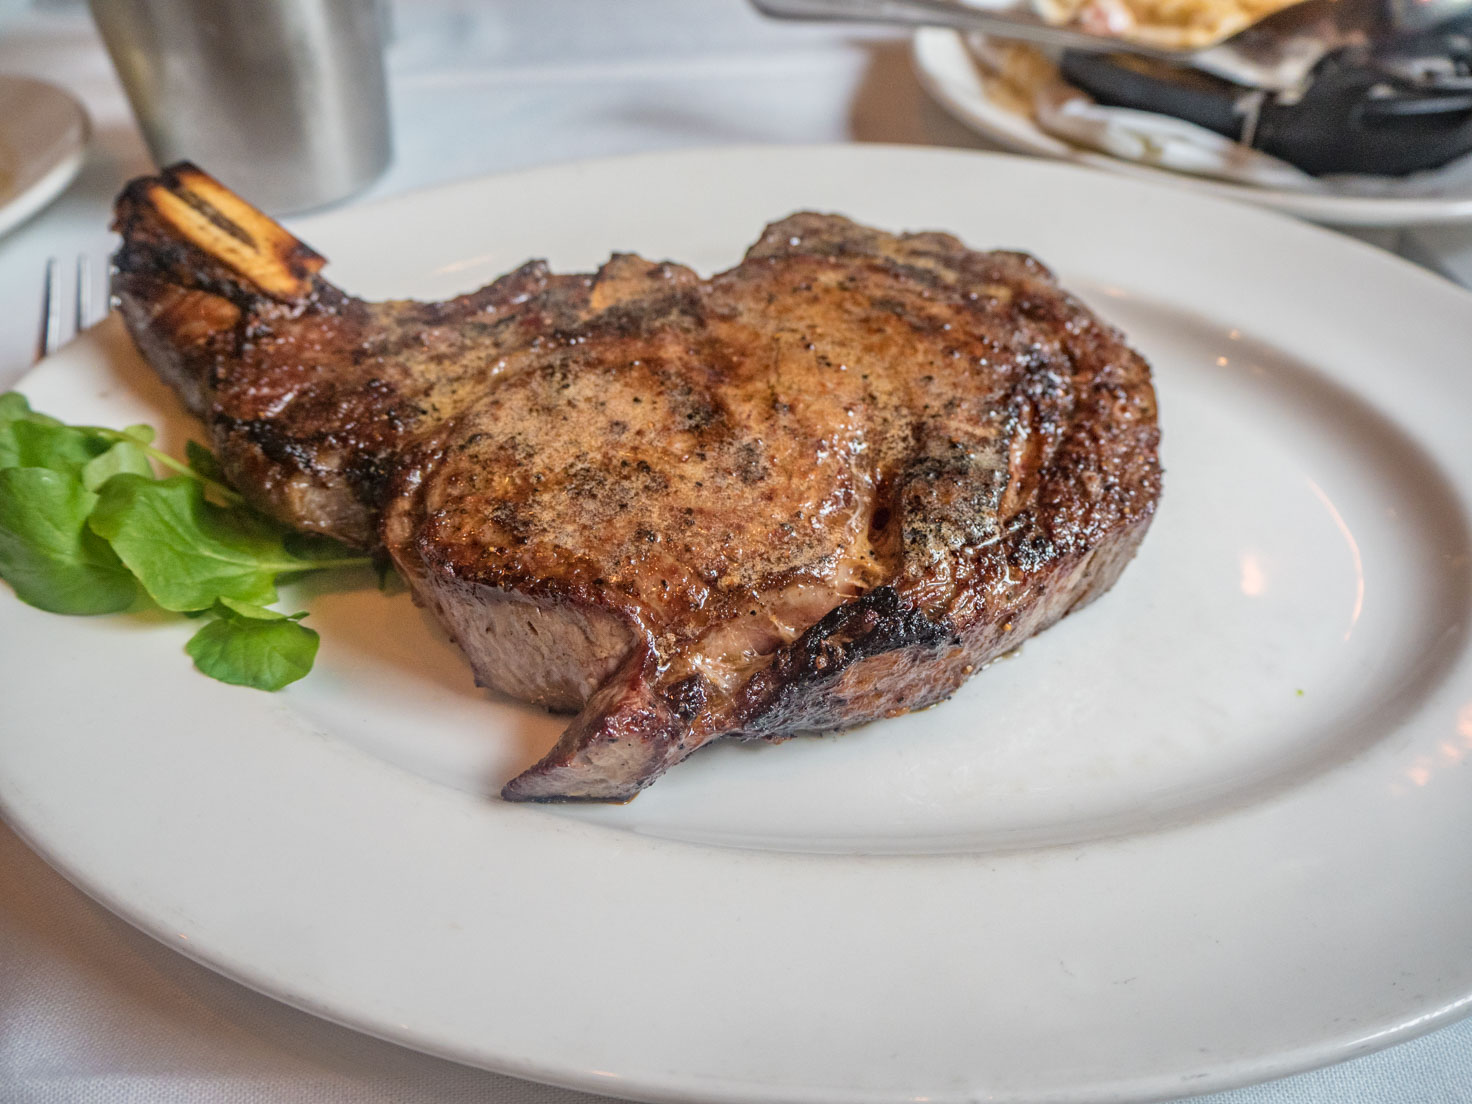 22oz bone in Ribeye steak at Capital Grille Chicago downtown by Chic Journal blog